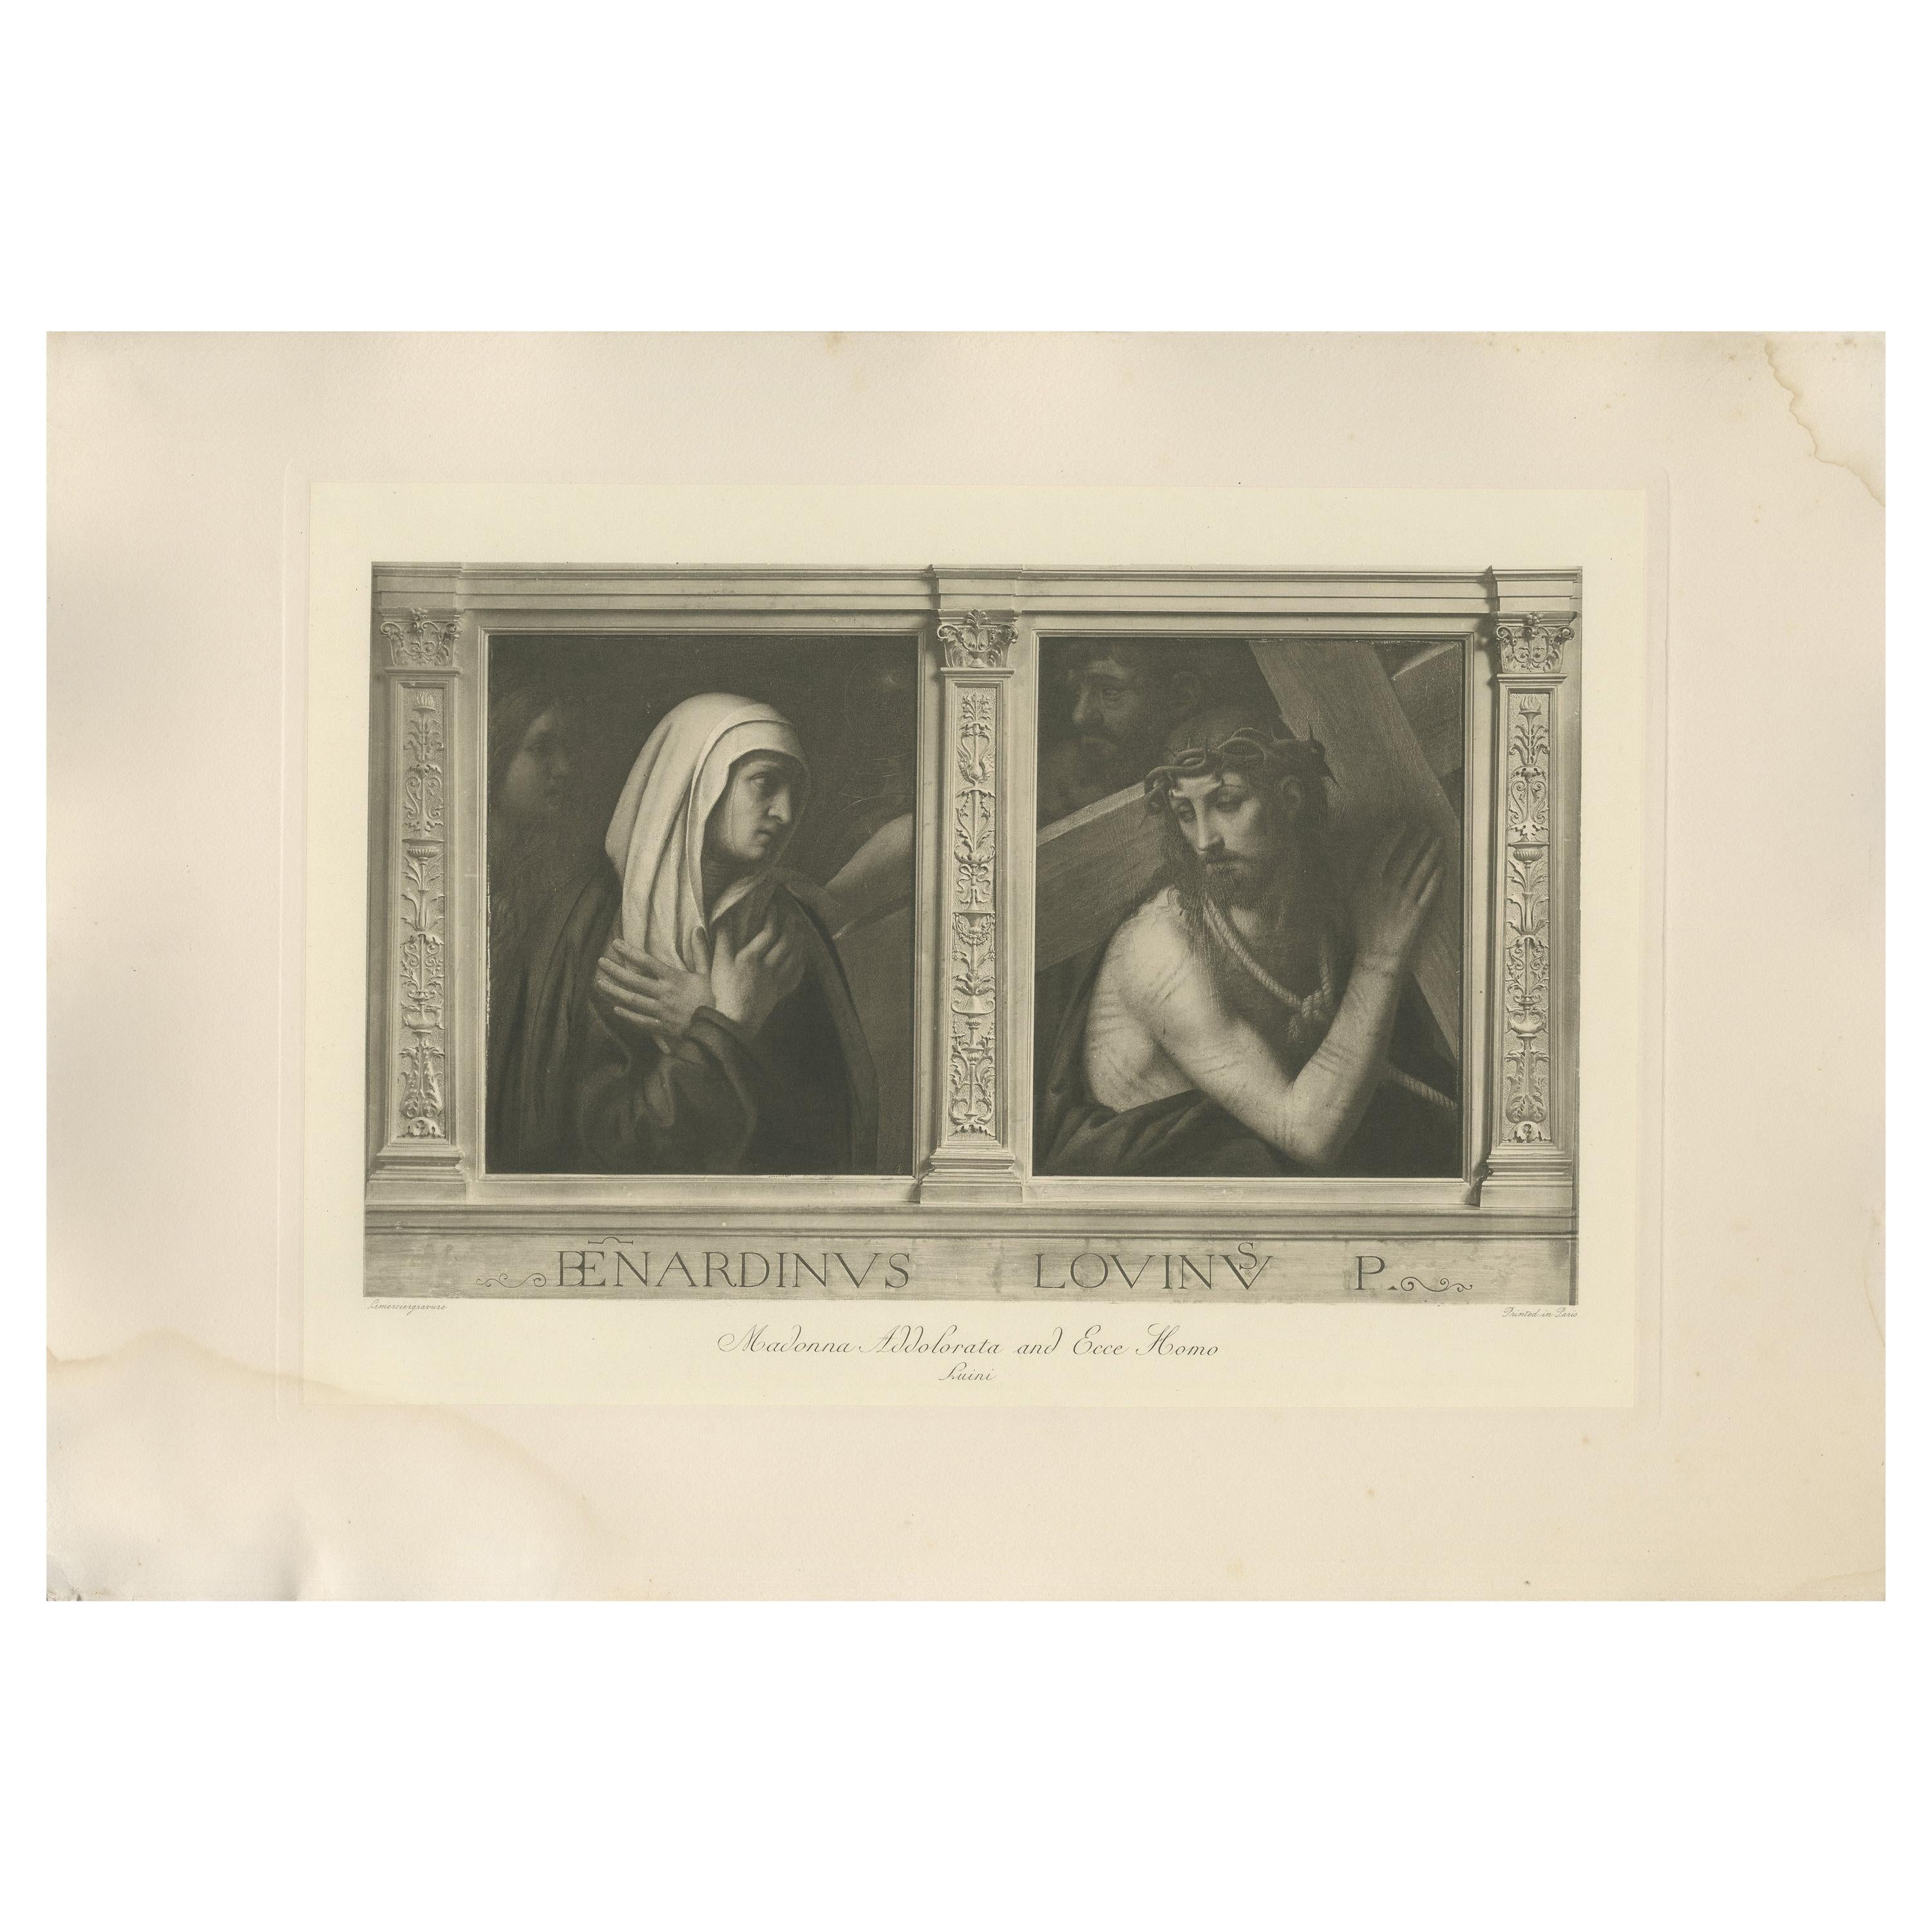 Antique Print of 'Madonna Addolorata and Ecce Homo' Made after Luini 'c.1890'